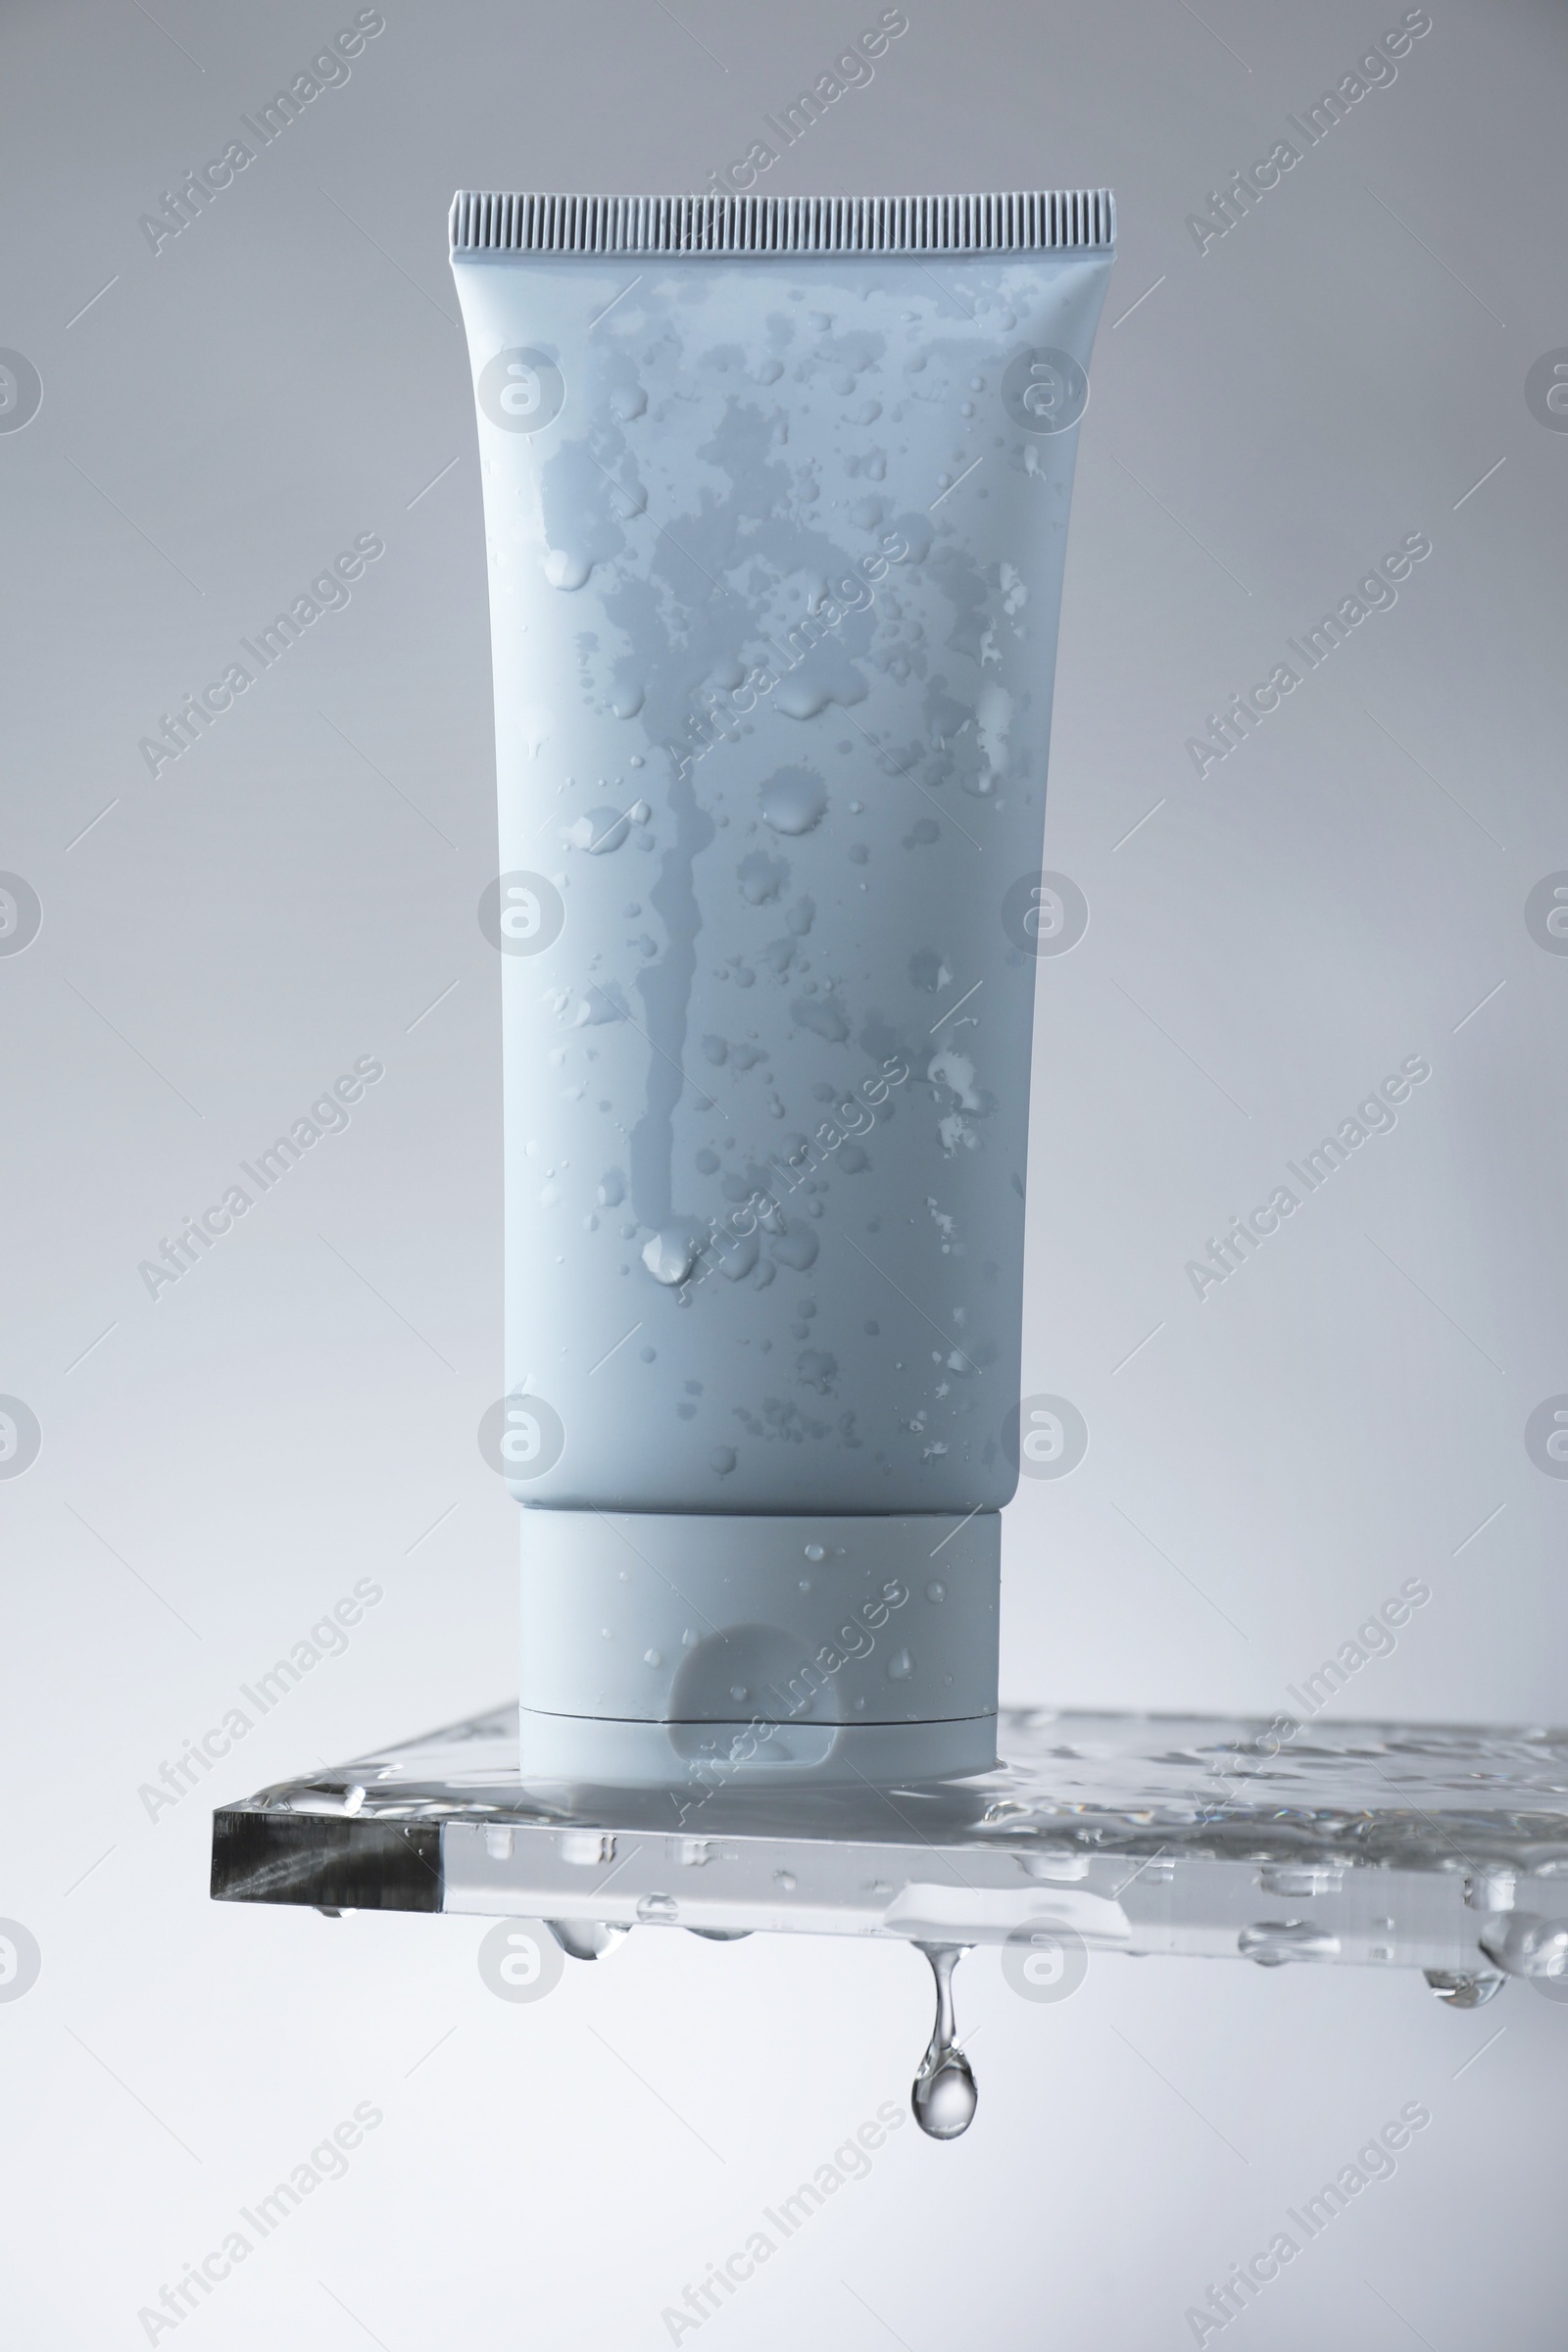 Photo of Moisturizing cream in tube on glass with water drops against grey background